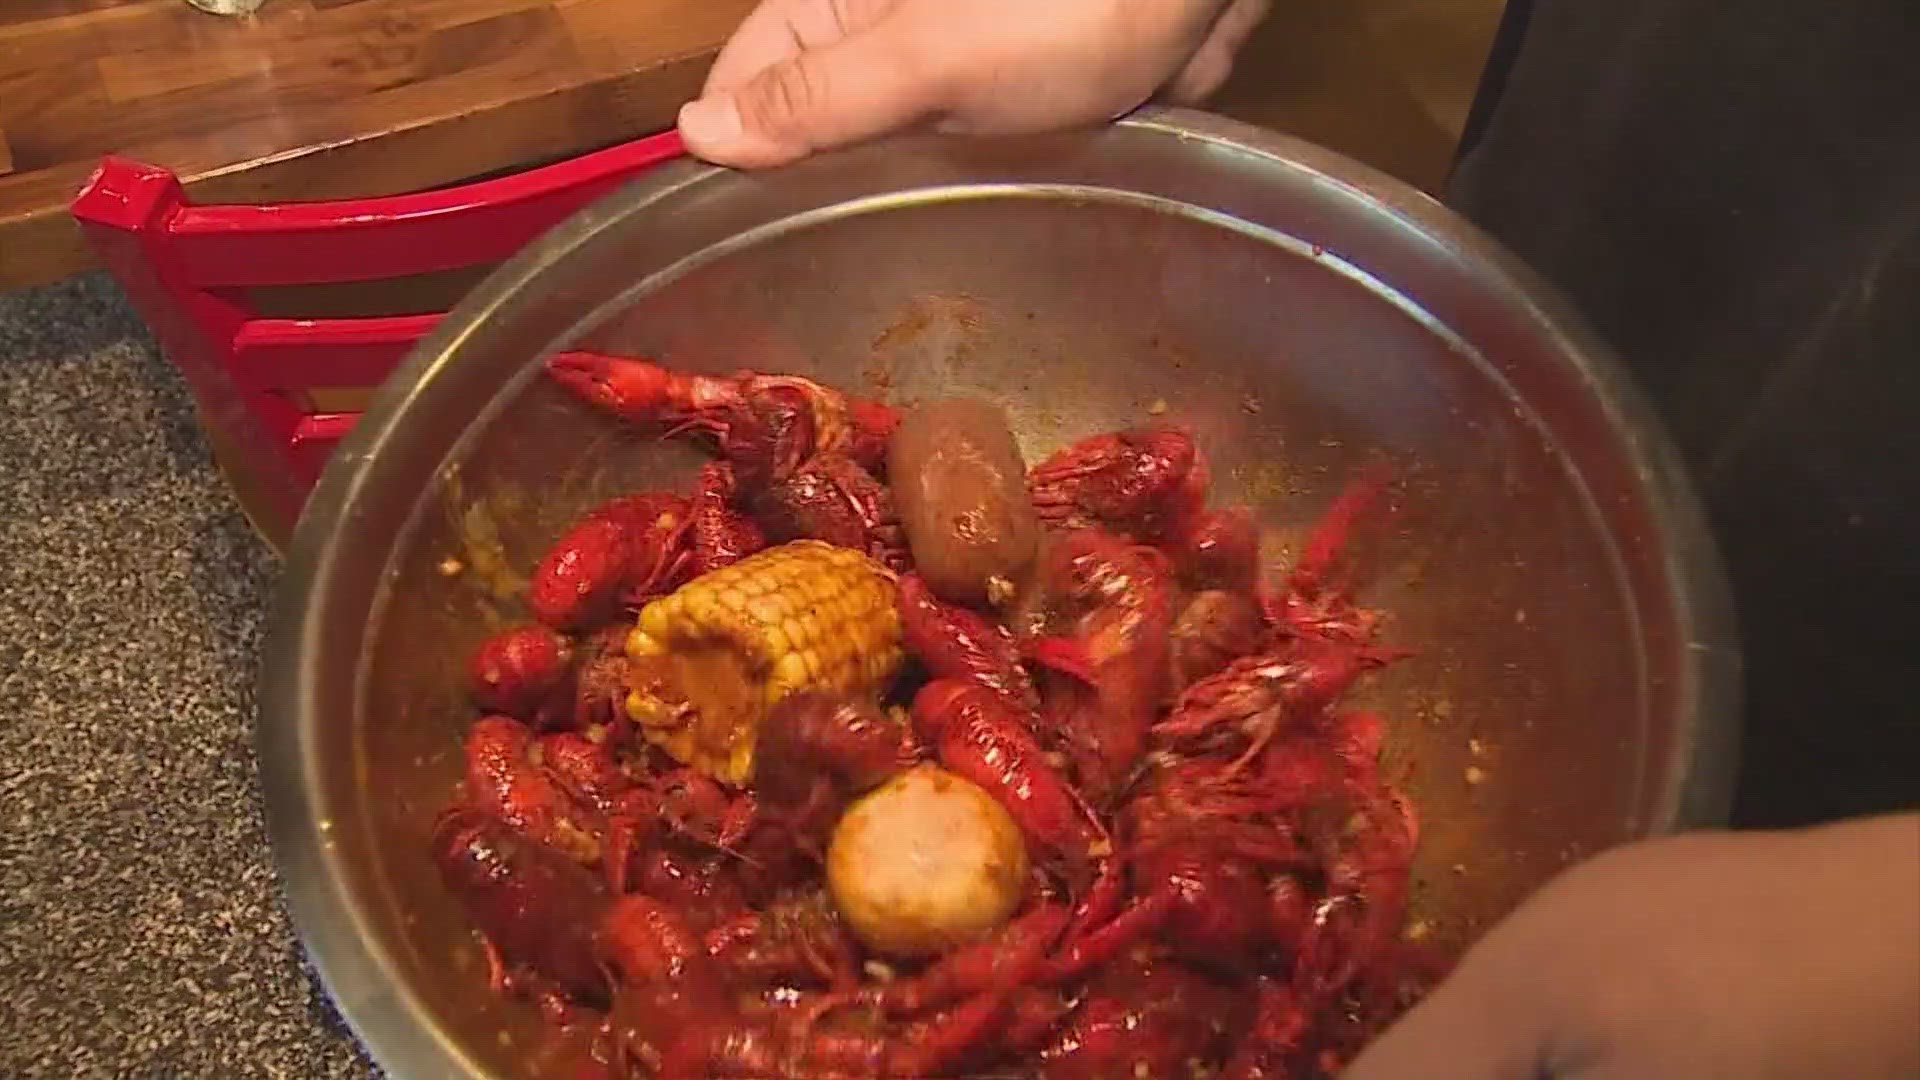 Louisiana's summer heat and drought caused a crawfish shortage, and businesses like the Cajun Crawfish Company are feeling the pinch.